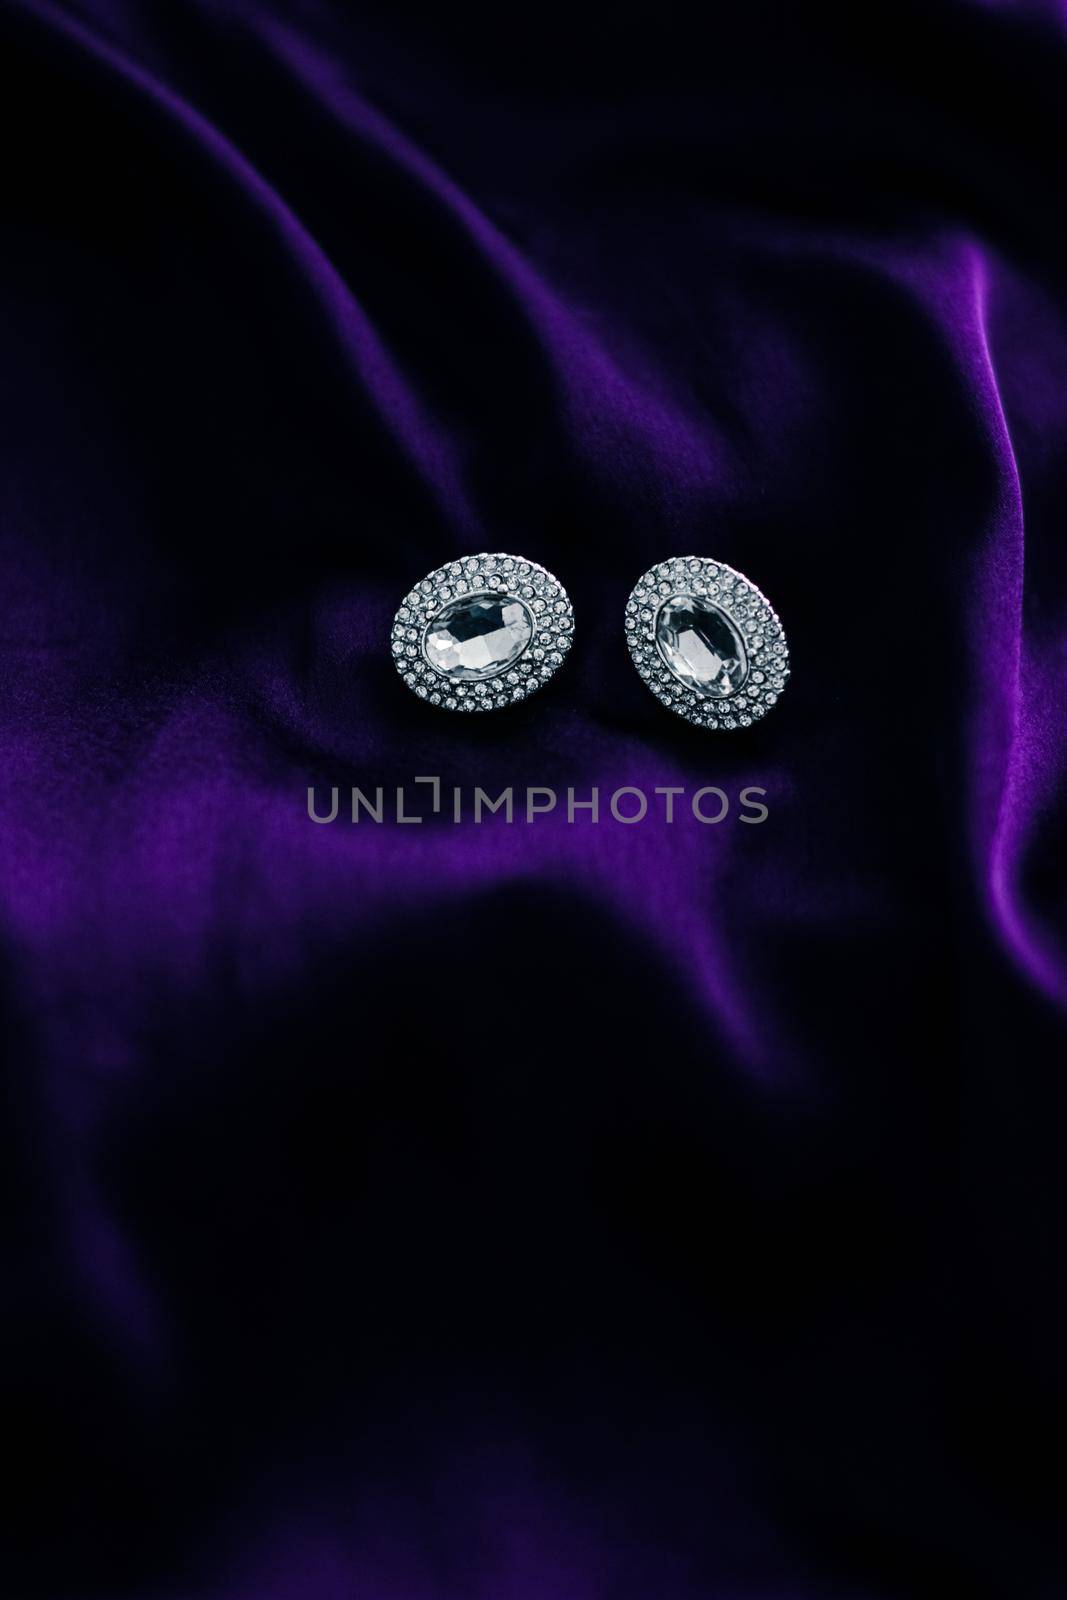 Luxury diamond earrings on dark violet silk fabric, holiday glamour jewelery present by Anneleven